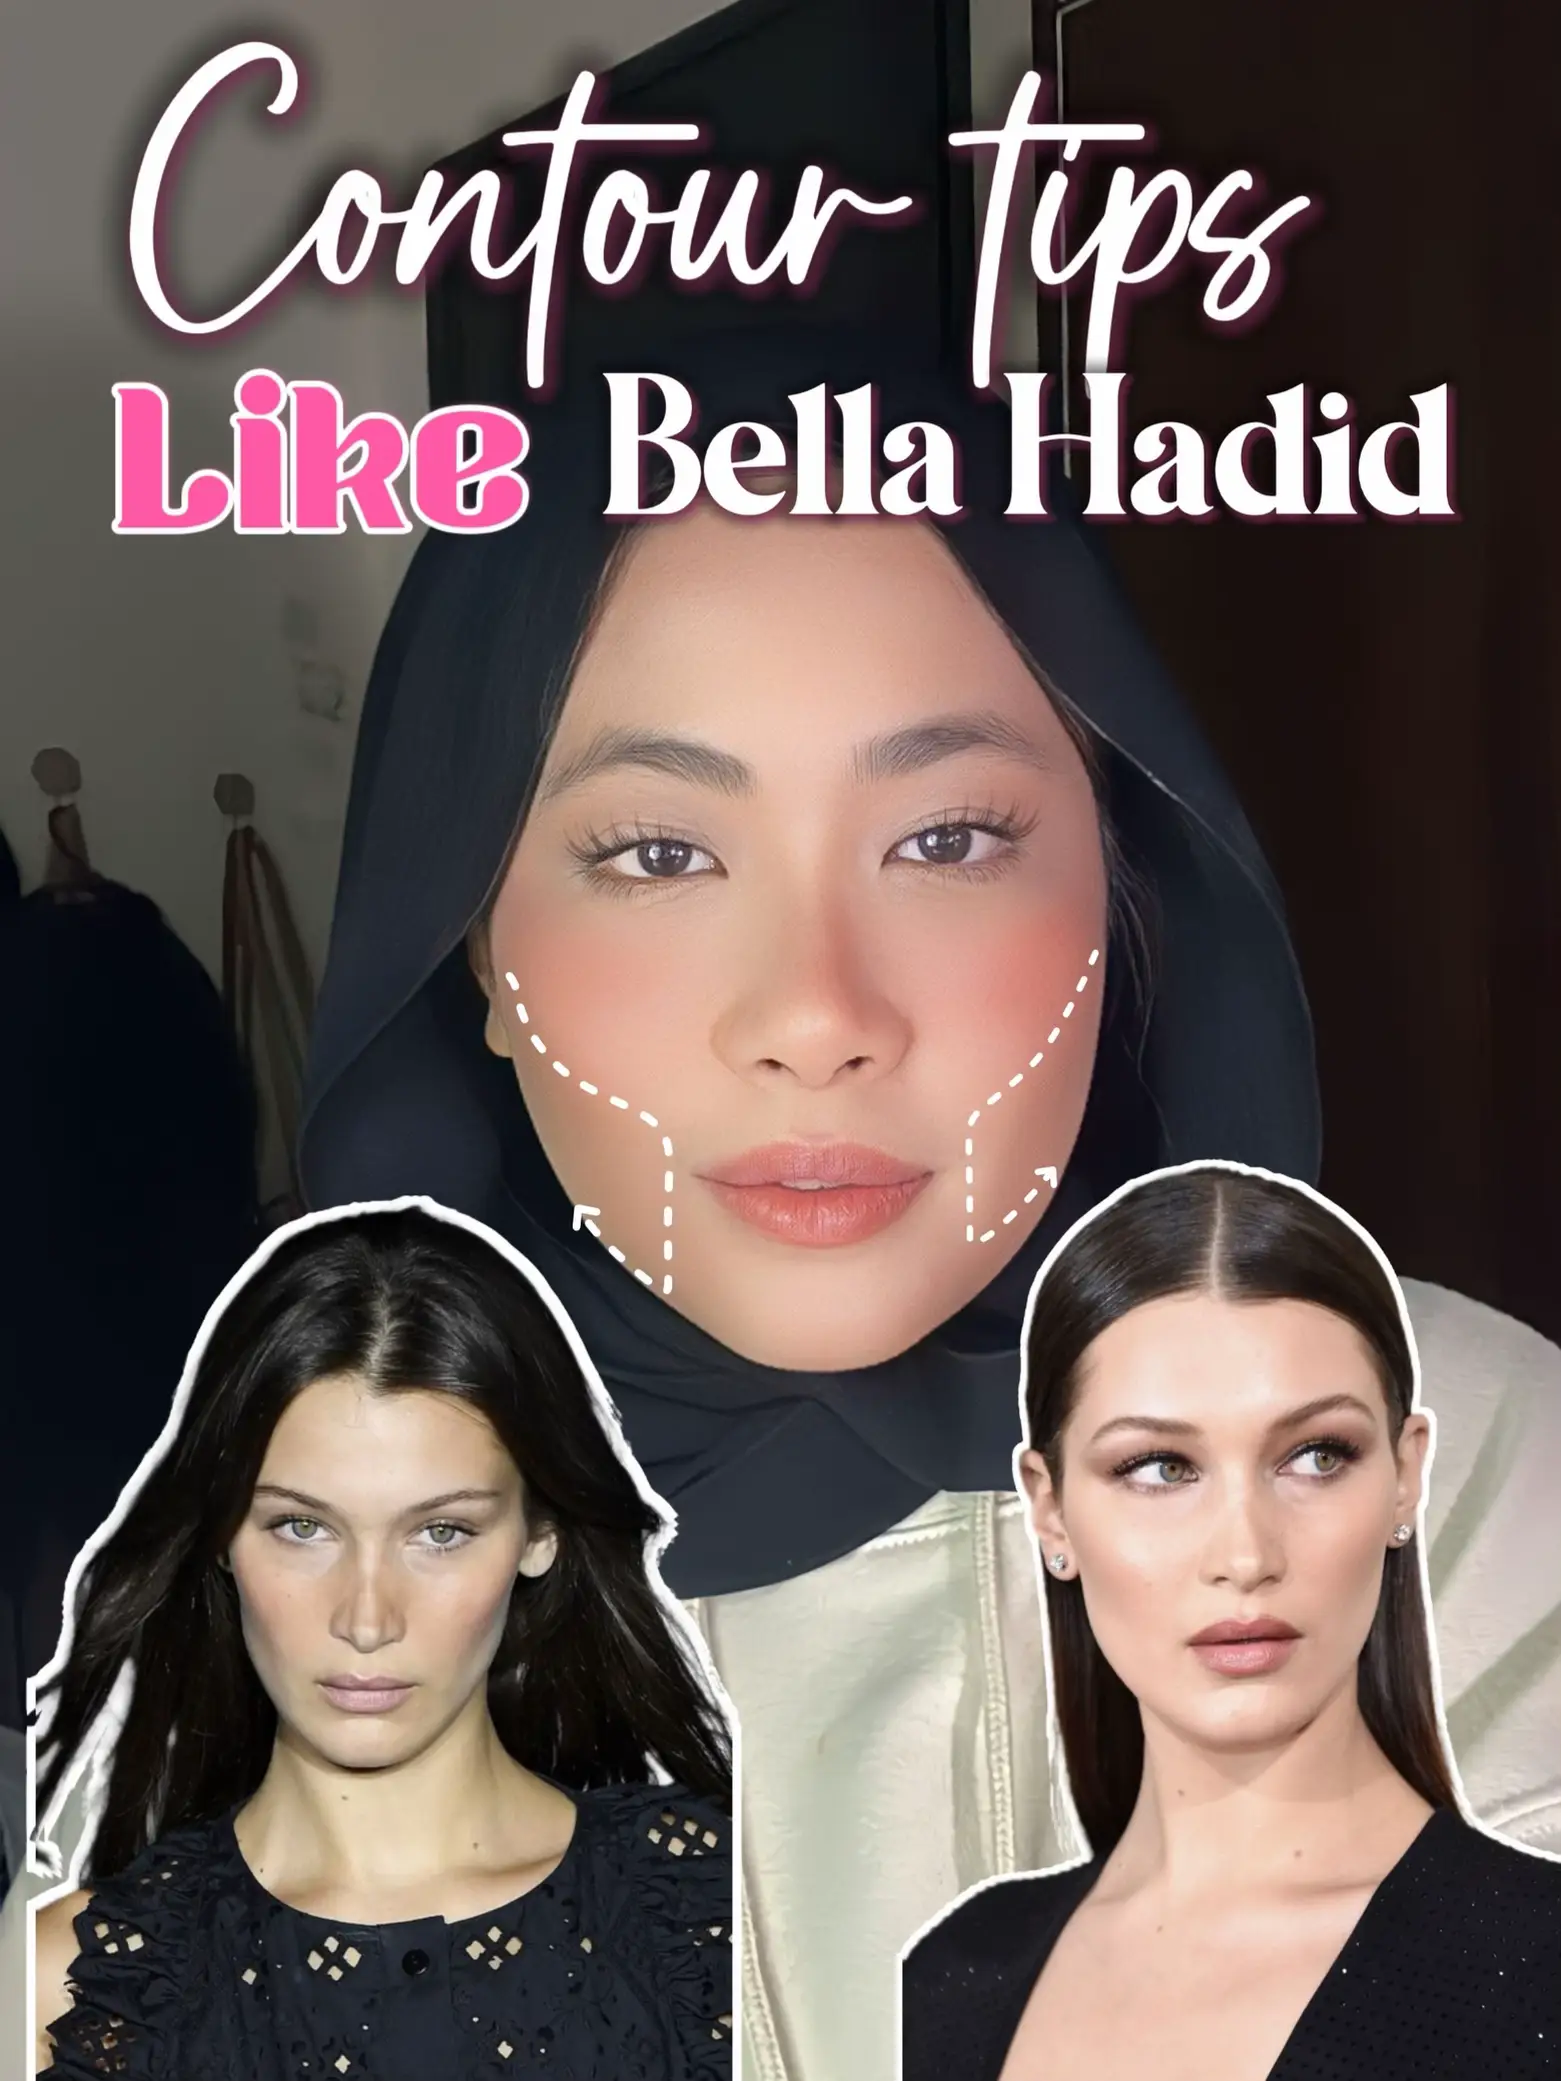 Bella Hadid-inspired makeup is trending on TikTok, and it's all about  lifted skin and eyes